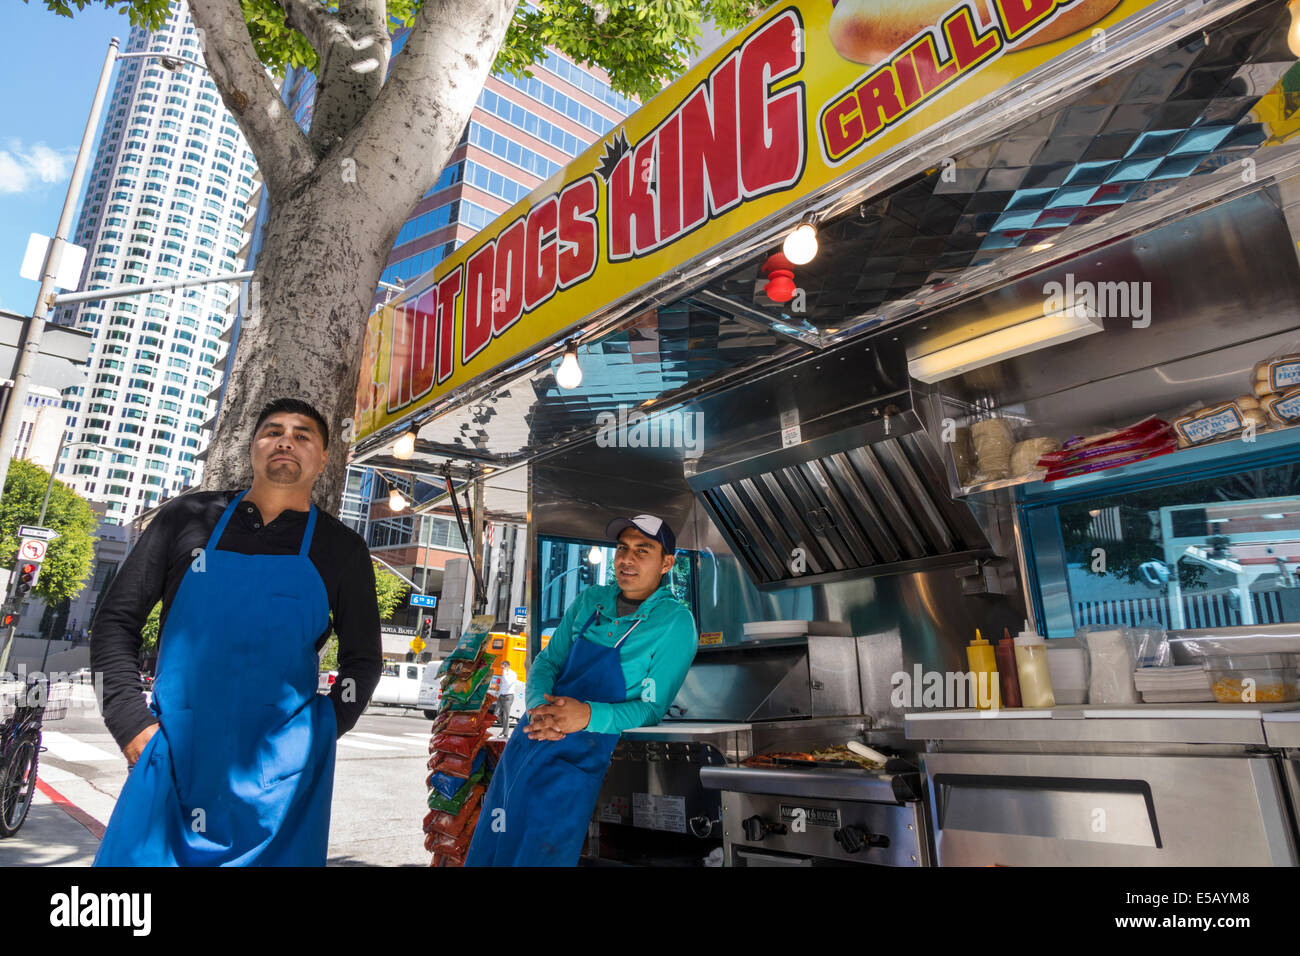 Los Angeles California,Downtown,district,street scene,Hope Street,hot dogs,vendor vendors stall stalls booth market marketplace,buyer buying selling,f Stock Photo